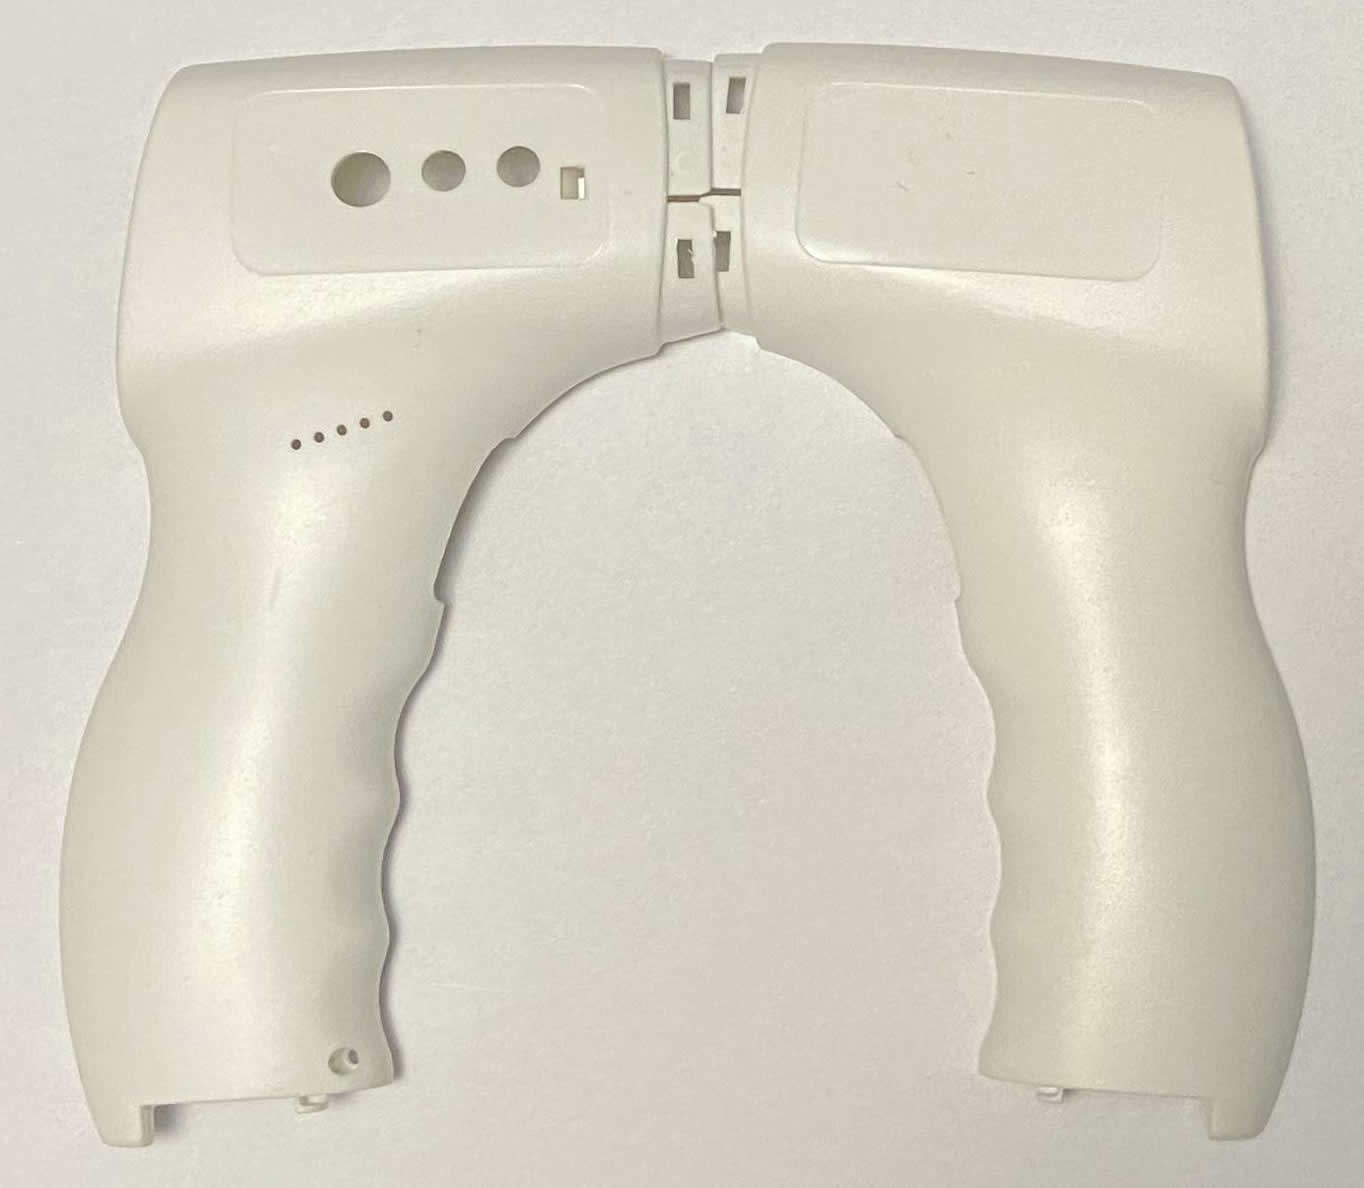 CKD PARTS OF INFRARED FOREHEAD THERMOMETER